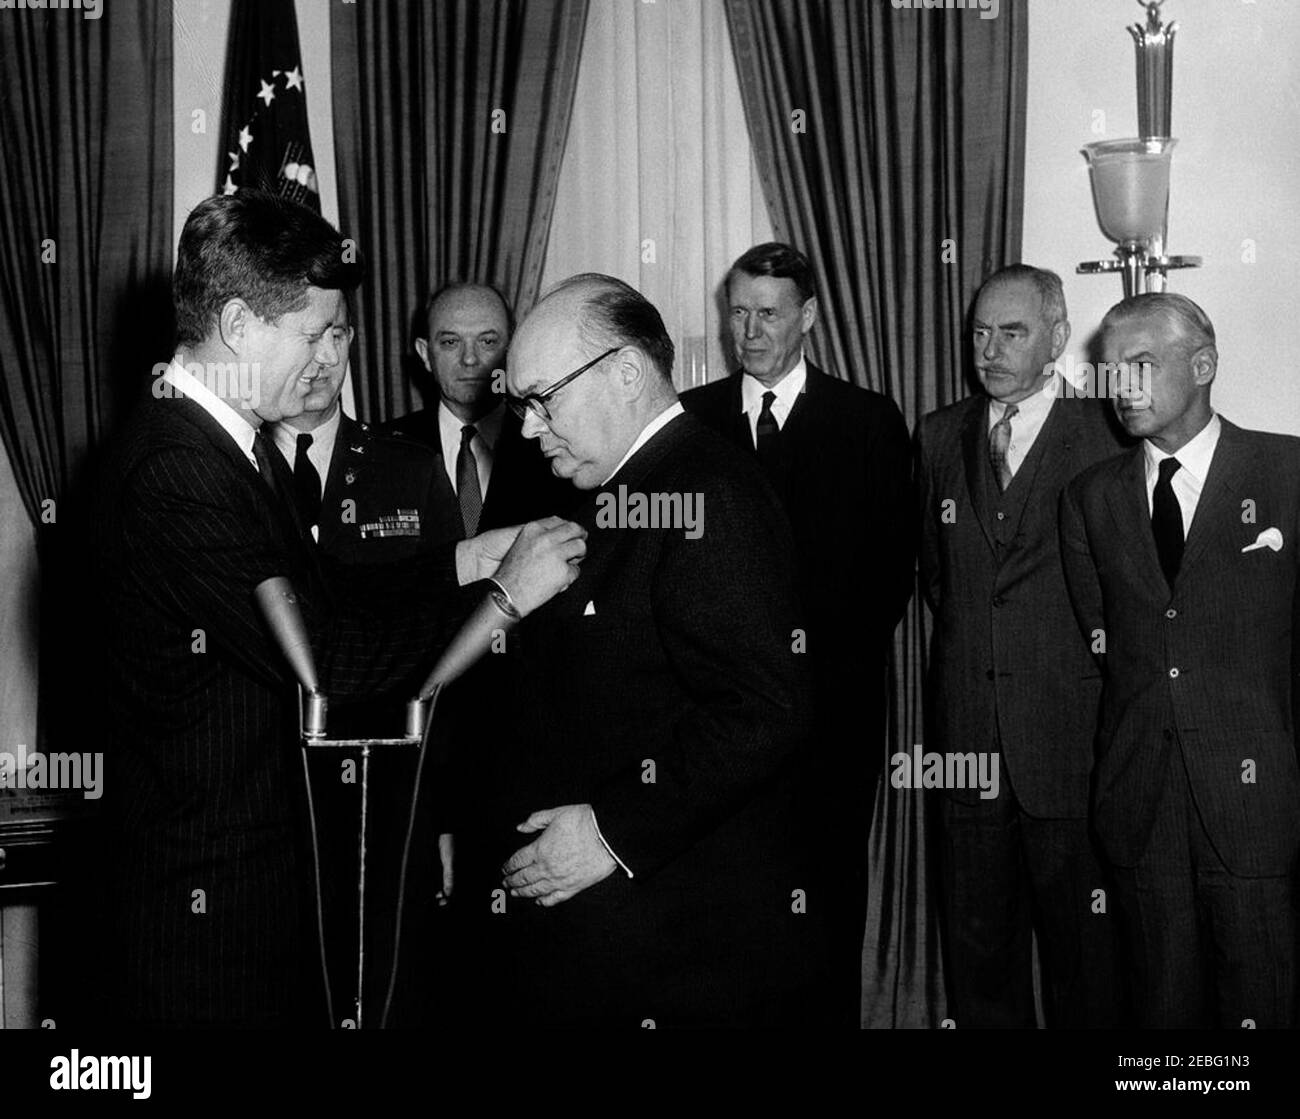 Presentation of the Medal of Freedom to Paul-Henri Spaak, Secretary General of NATO (North Atlantic Treaty Organization), 11:15AM. President John F. Kennedy presents the Medal of Freedom to Secretary General of the North Atlantic Treaty Organization (NATO) Paul-Henri Spaak, Oval Office, White House, Washington, D.C. President Kennedy pins the medal to Secretary General Spaaku2019s jacket. (L-R) Looking on: Military Aide to the President Chester V. Clifton (mostly hidden); Secretary of State Dean Rusk; United States Ambassador to NATO Warren Randolph Burgess; Former Secretary of State Dean Ach Stock Photo